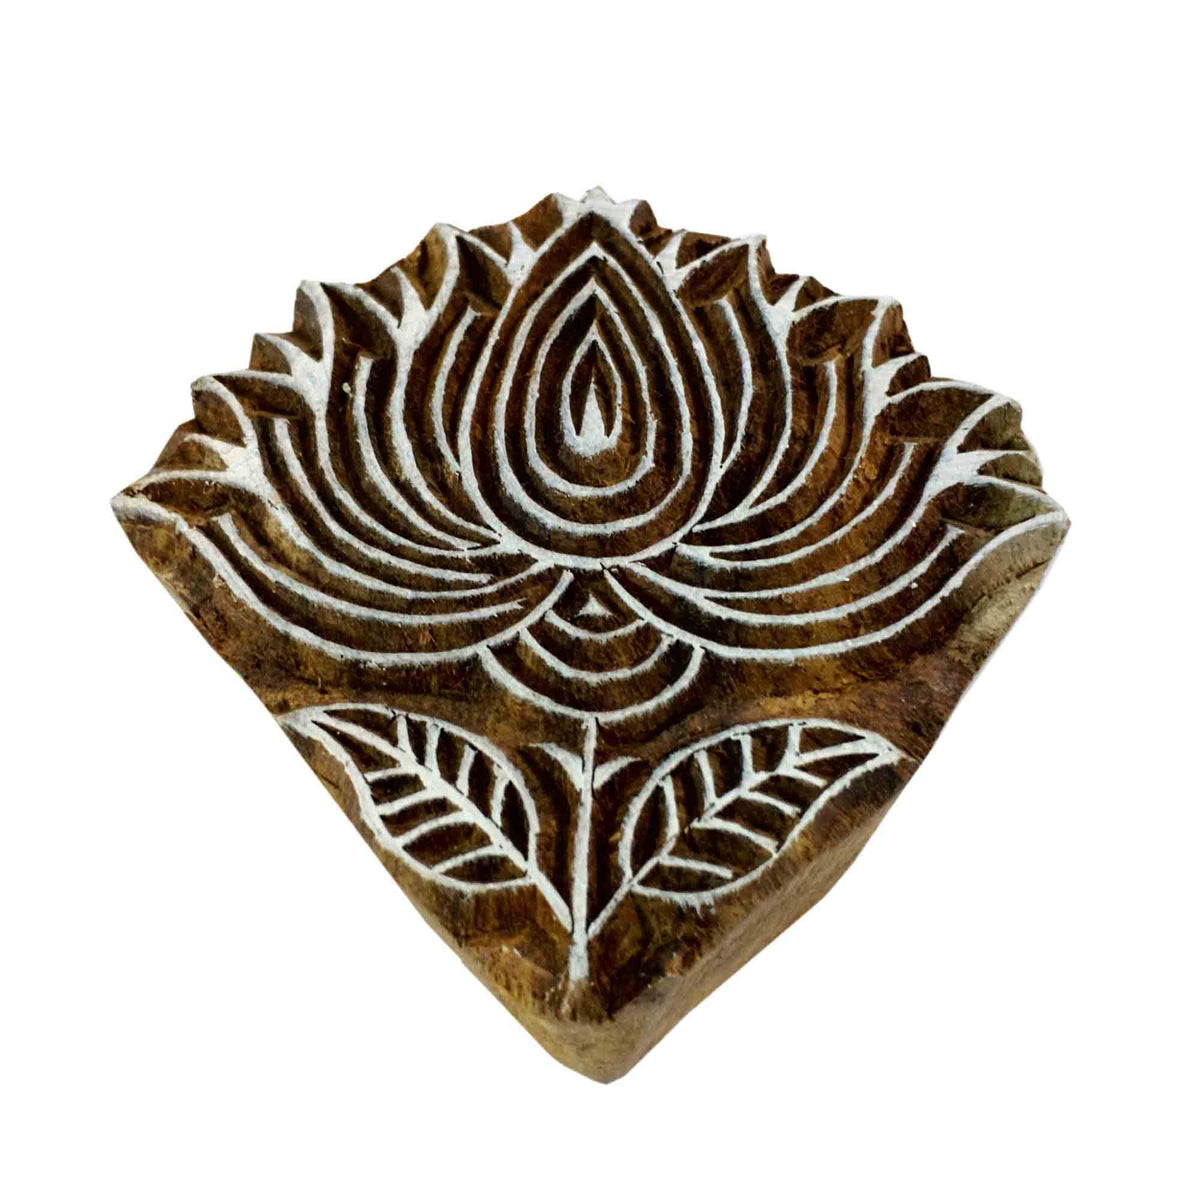 SEWACC 6 Pcs Lotus Wood Seal Create Your Own Stamp Photo Album Stamps Wood  Stamps for Making Block Printing Kit Book Stamp Stamps for Crafts Making